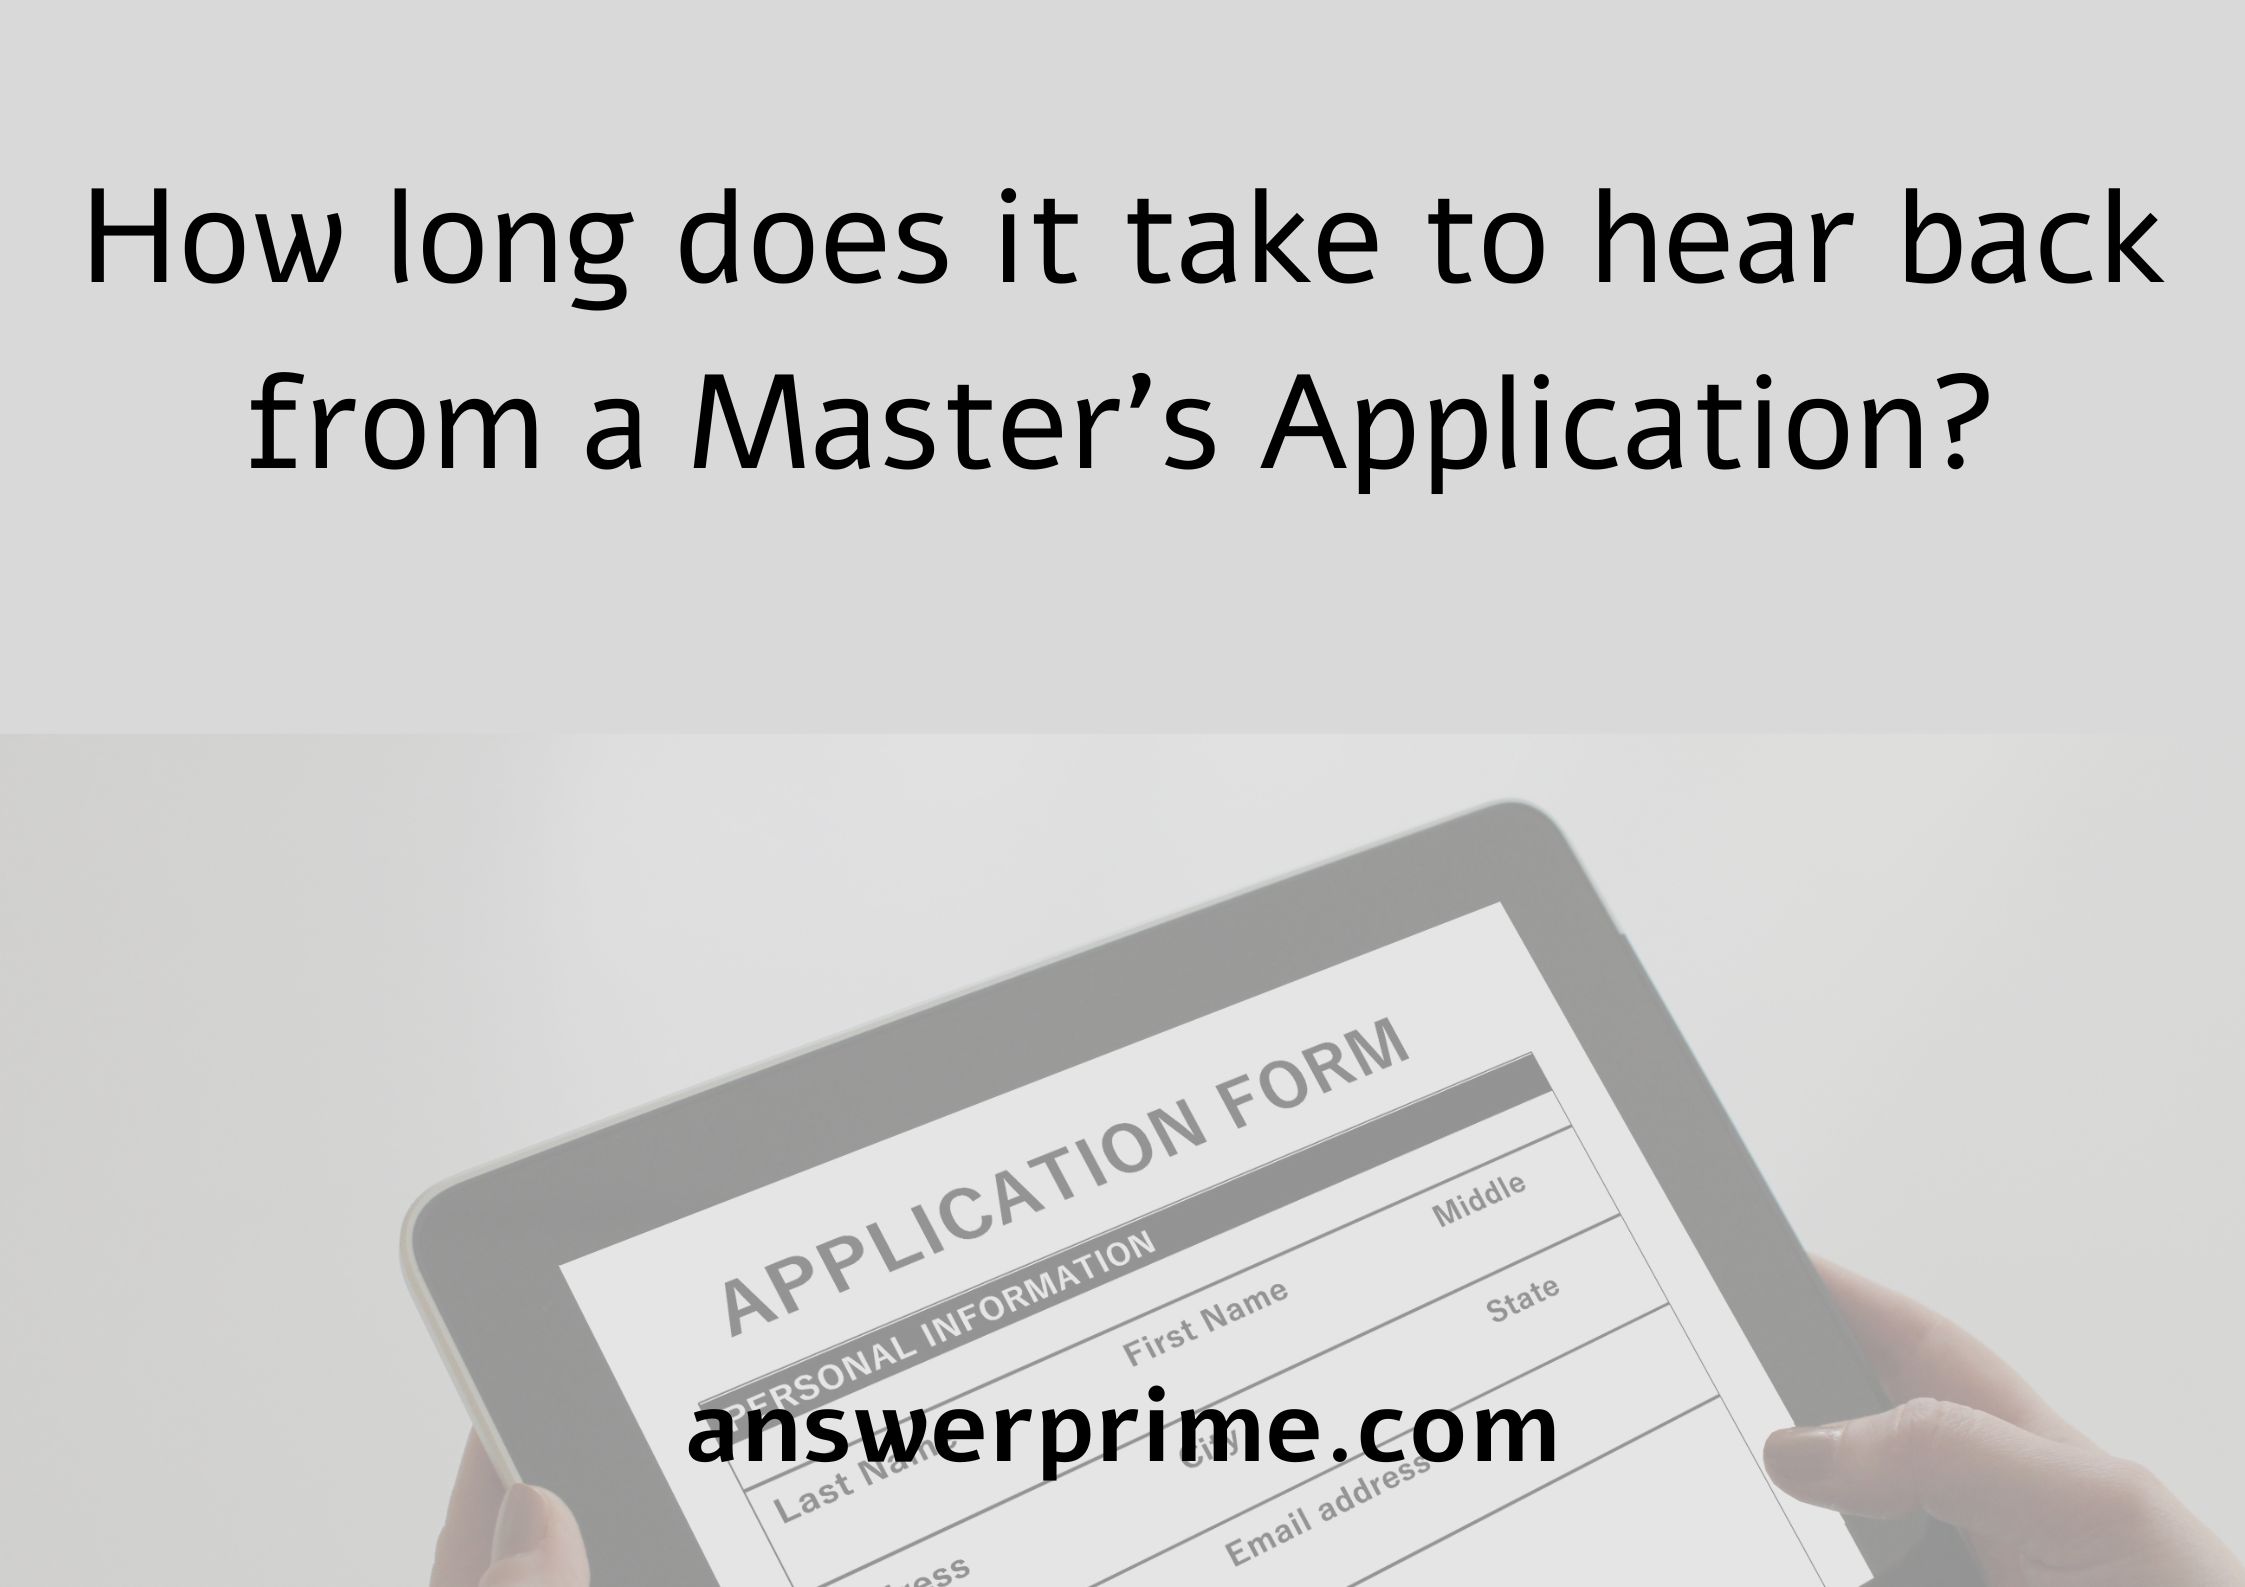 How long does it take to hear back from a Master’s Application?